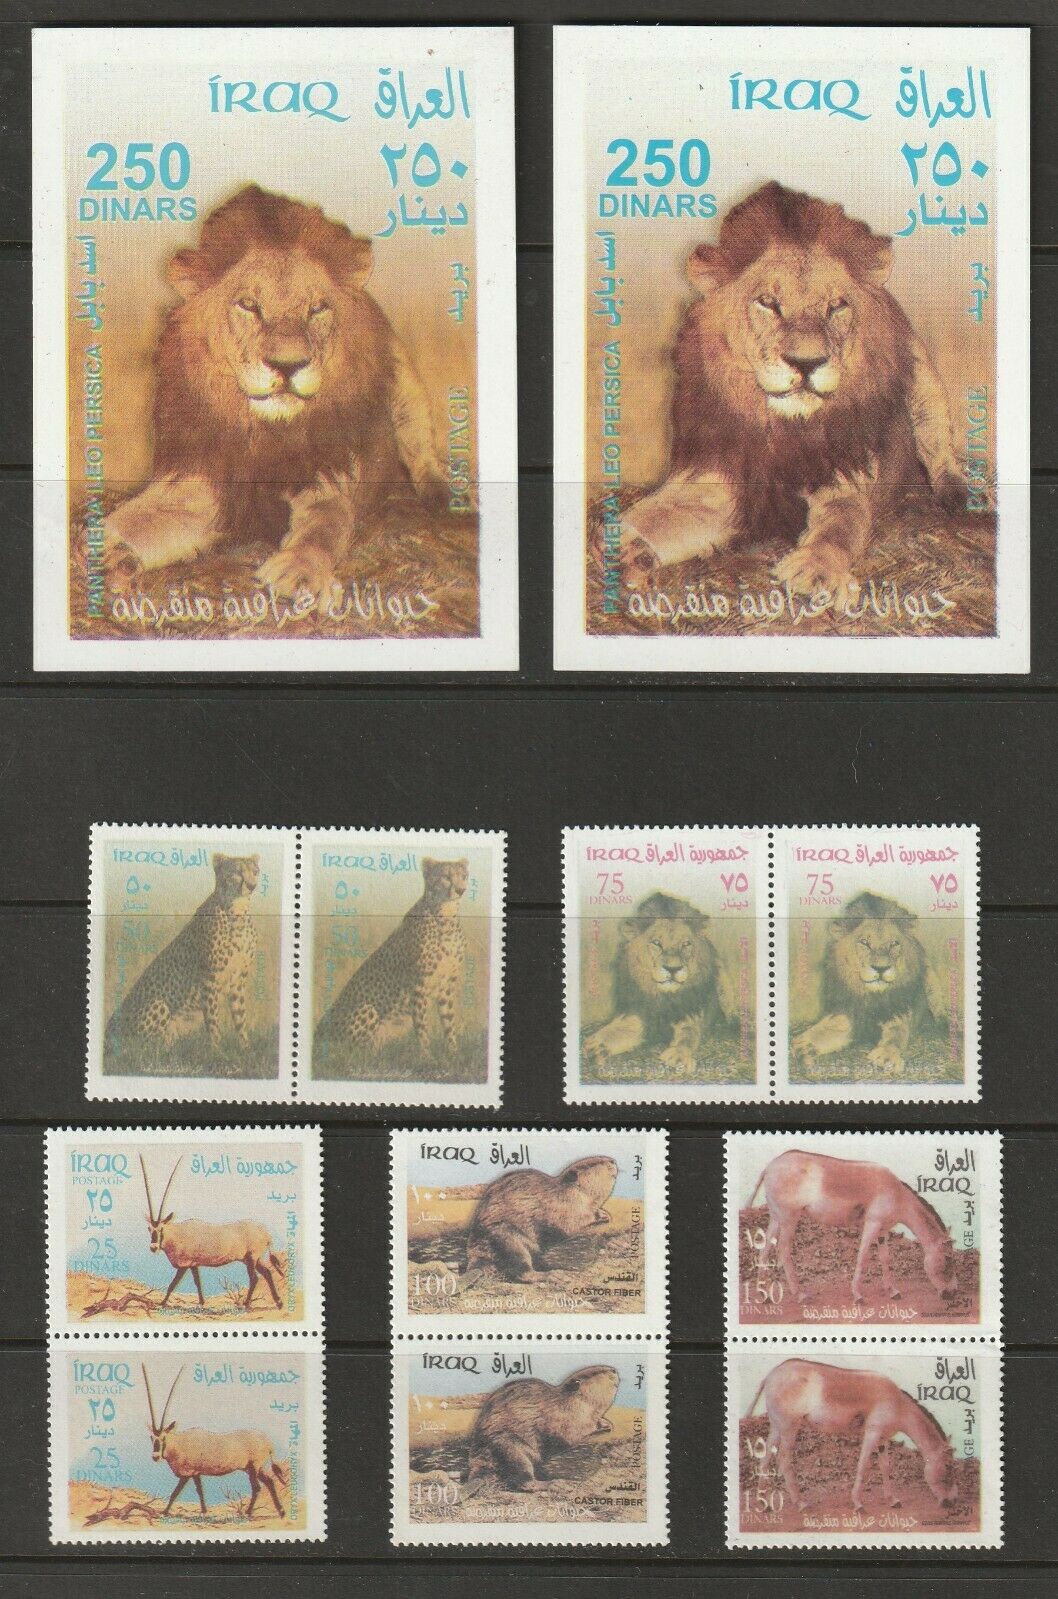 Iraq , The Animals 2 Ms & 2 Sets Stamps 2003 - Mnh